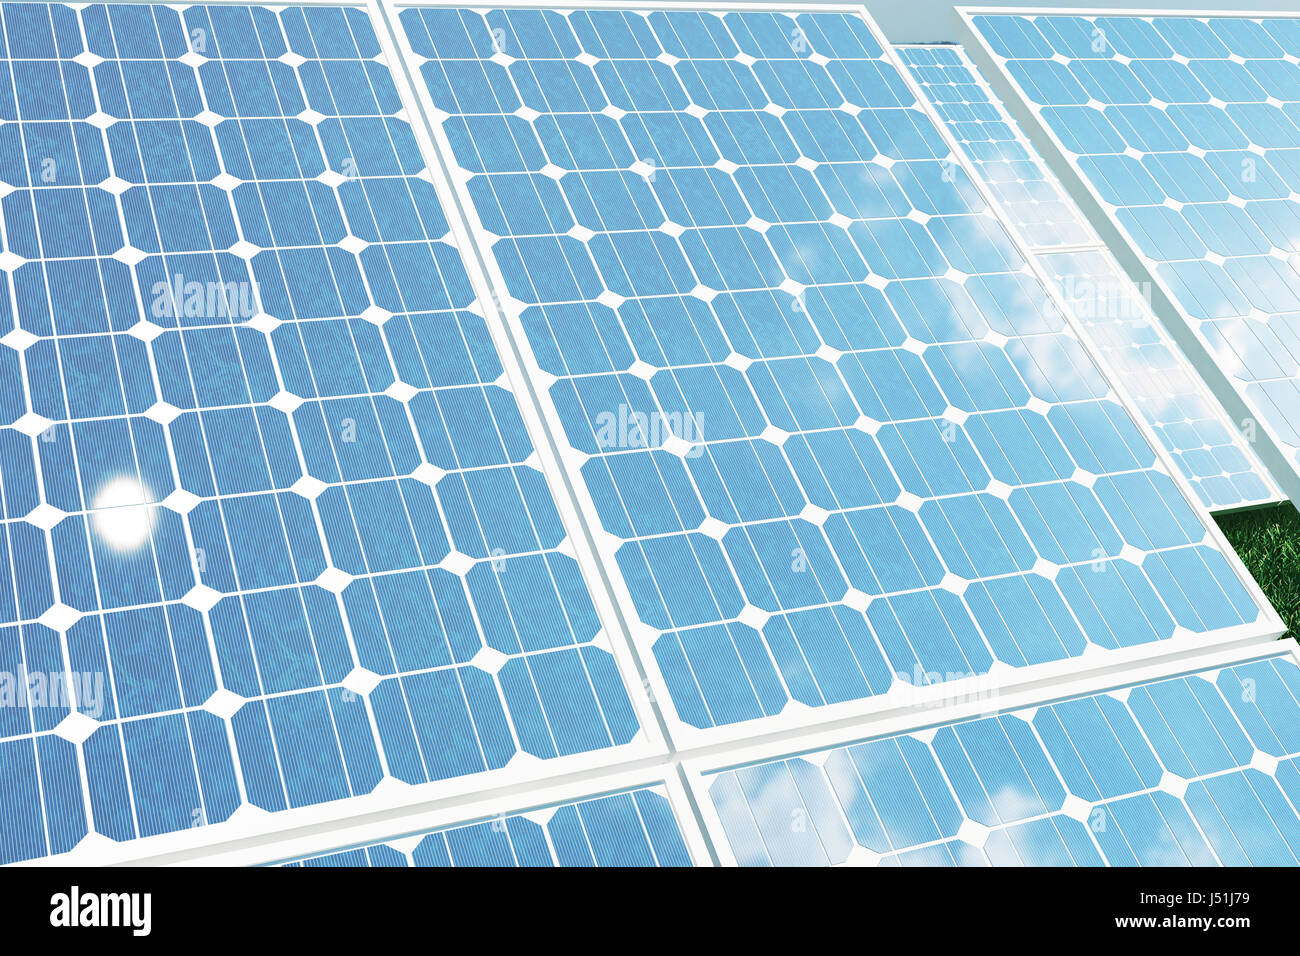 3D illustration solar panels with reflection the sunny sky. Background of photovoltaic modules for renewable energy. Stock Photo